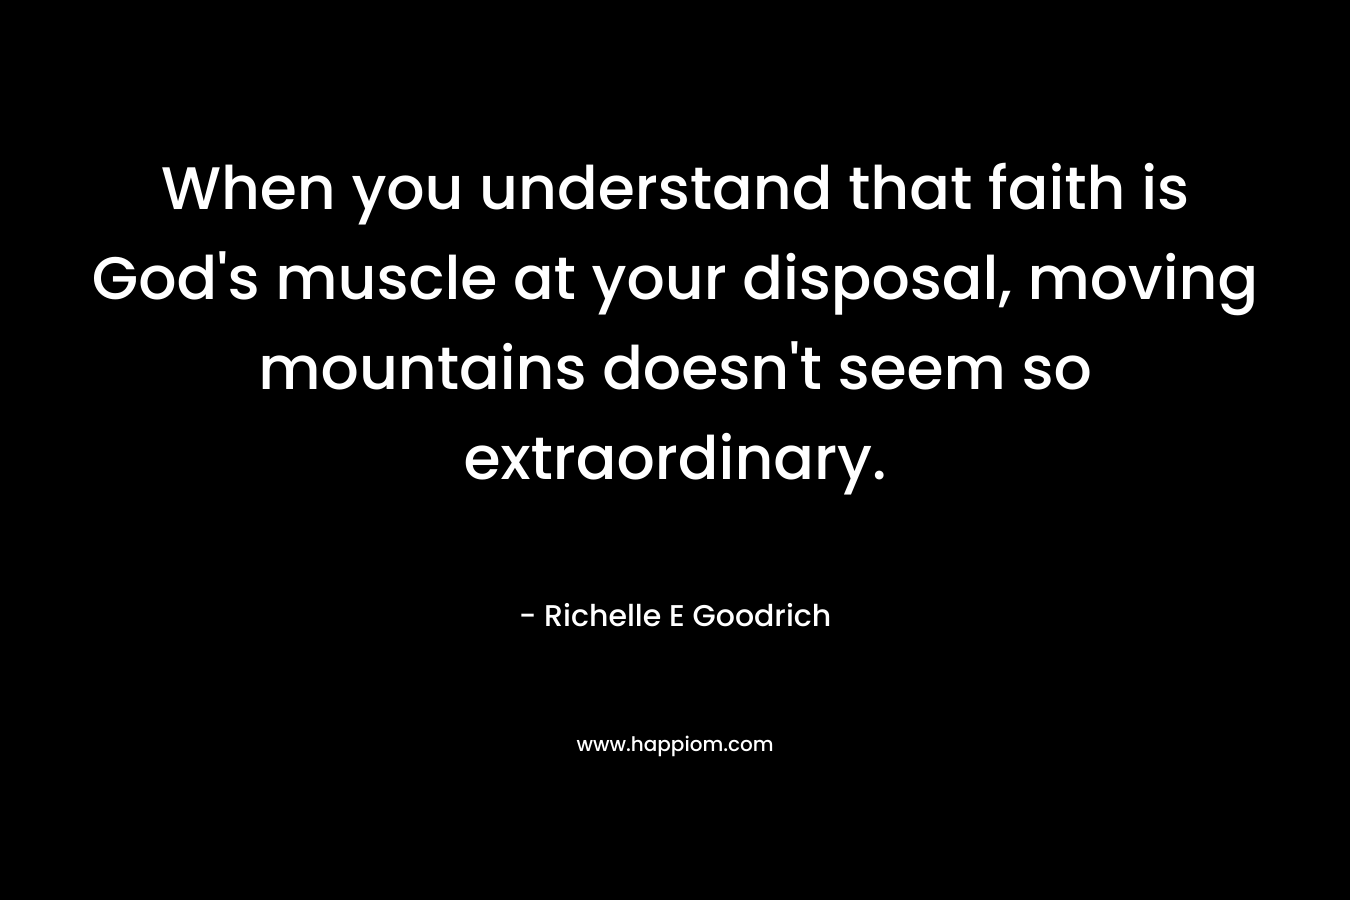 When you understand that faith is God’s muscle at your disposal, moving mountains doesn’t seem so extraordinary. – Richelle E Goodrich